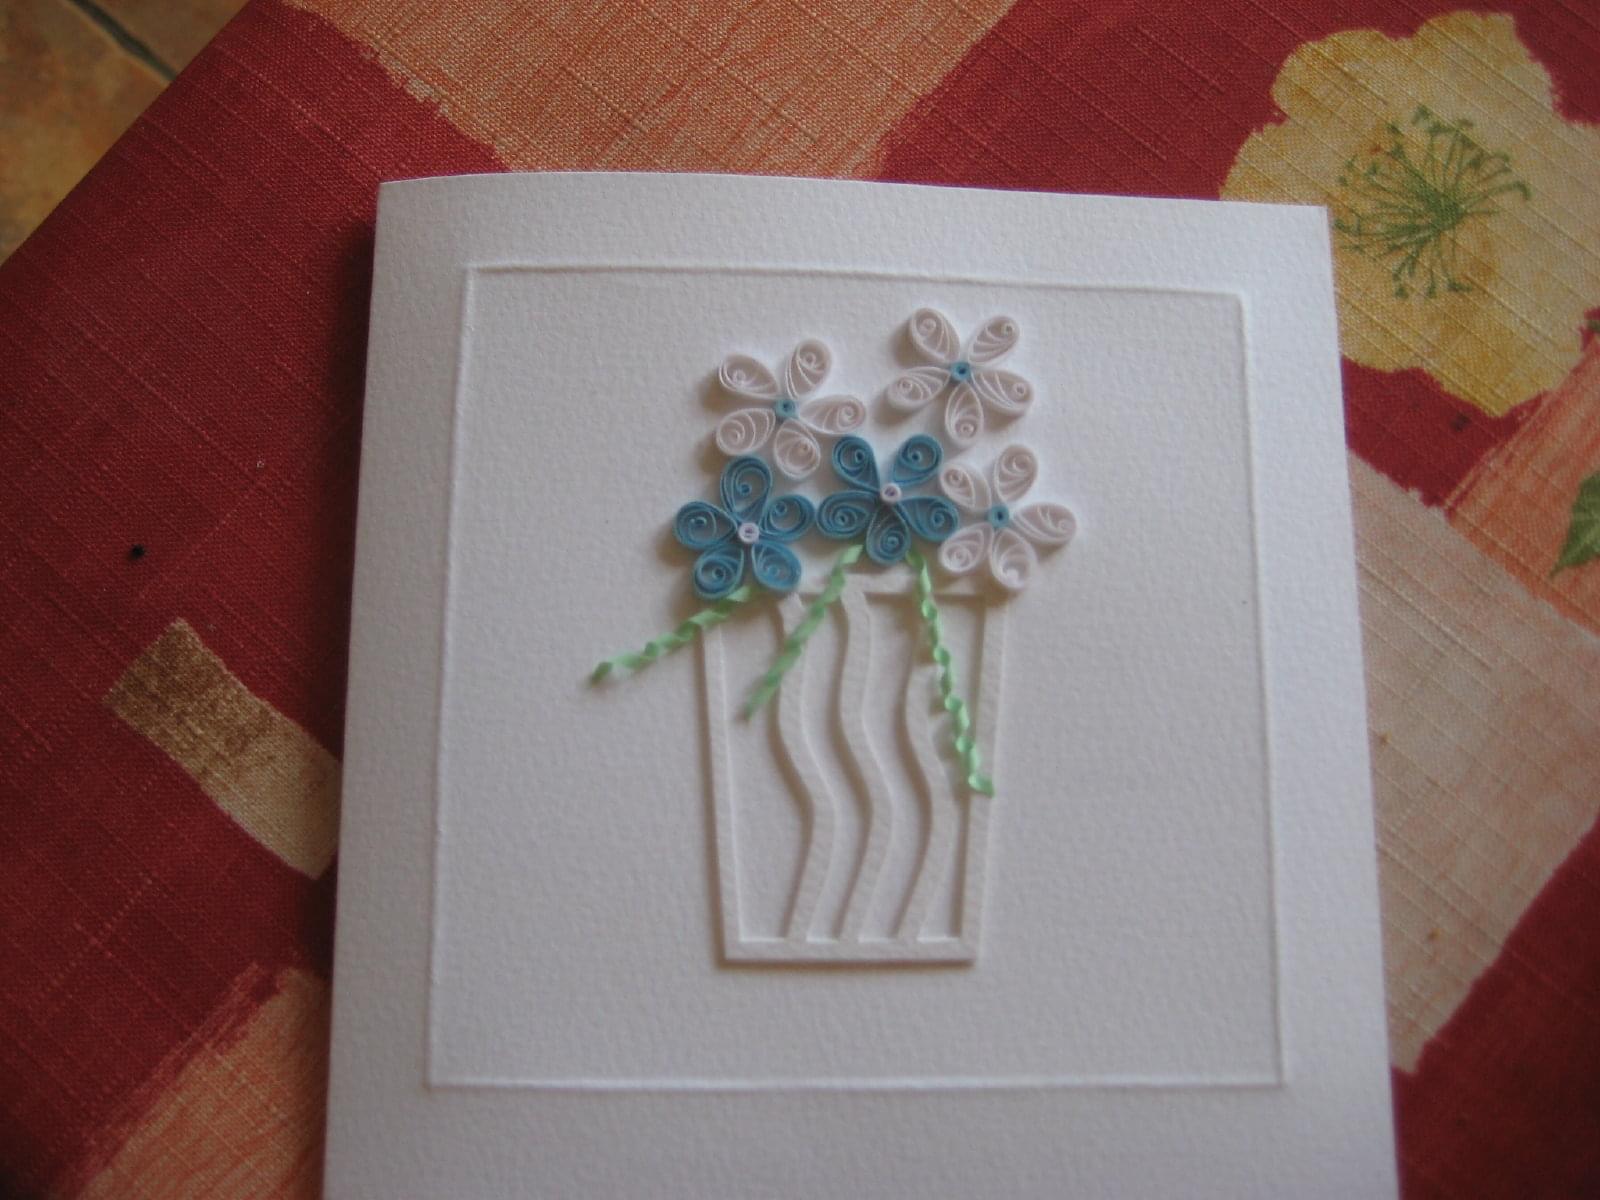 Free Quilling Patterns and Designs - Squidoo : Welcome to Squidoo